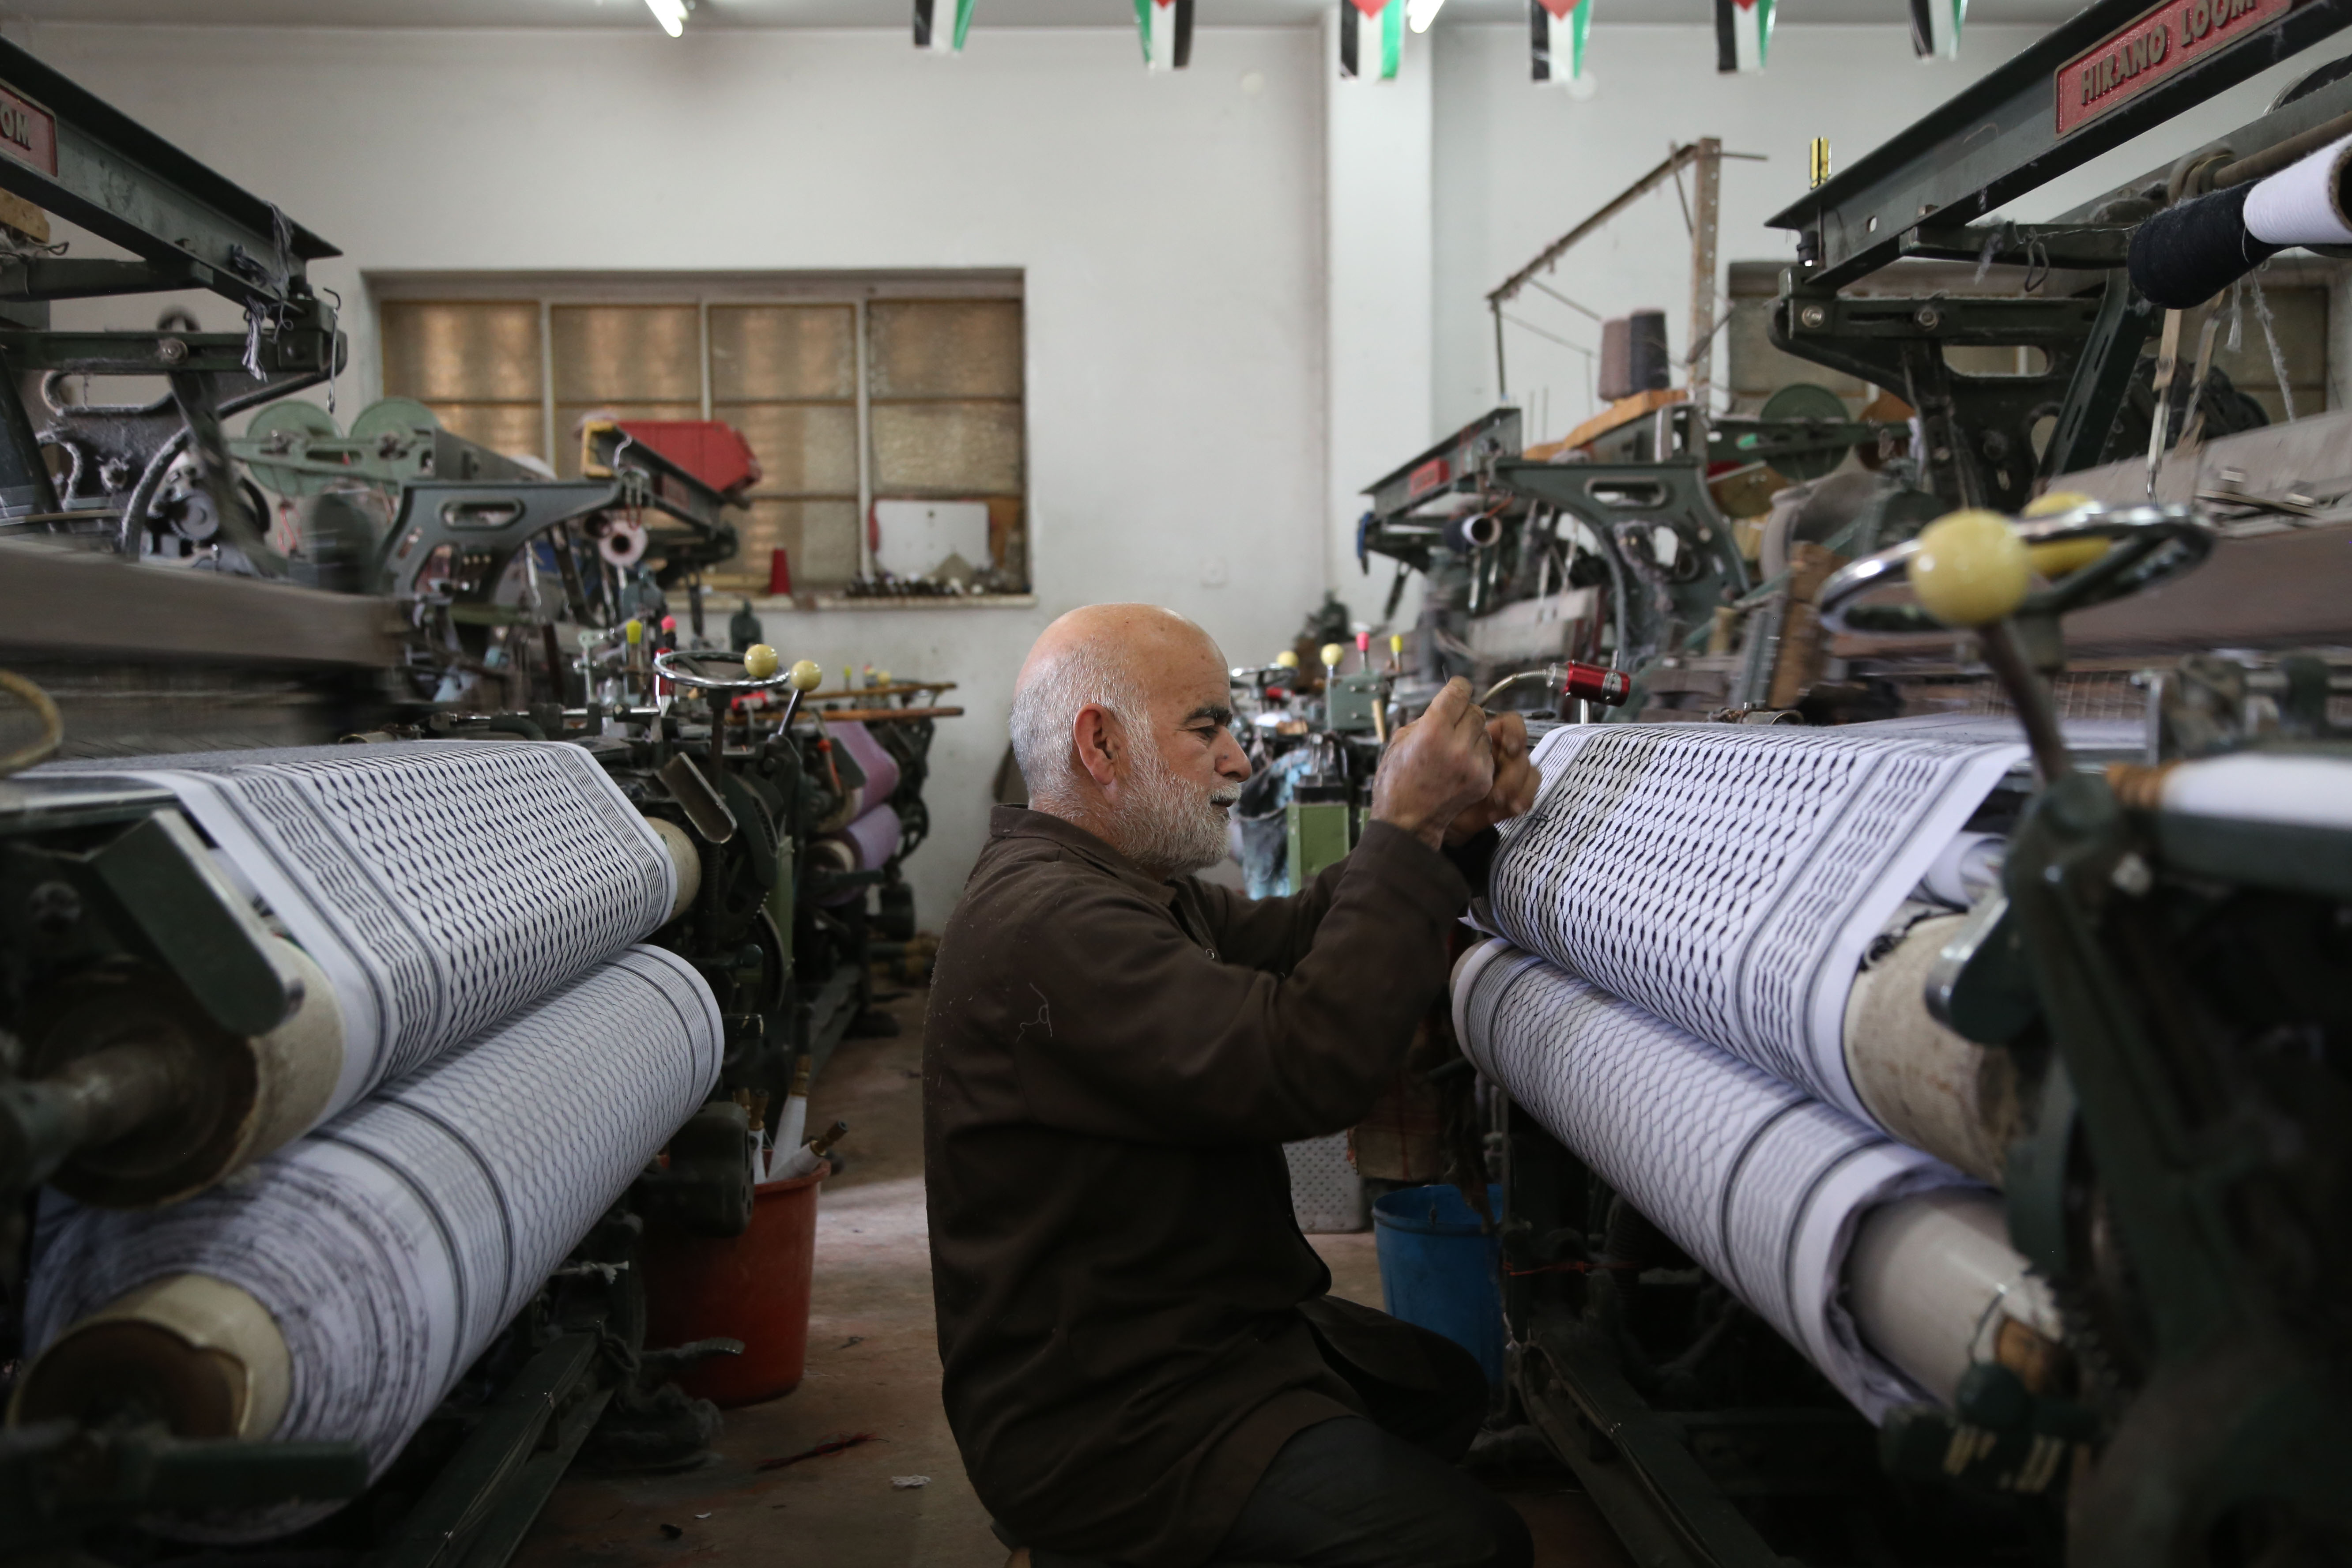 Abu Yaqub has been working in Hebron’s keffiyeh factory, Hirbawi, for 46 years. Hirbawi is the last remaining keffiyeh factory in Palestine, struggling to remain open in the face of cheap imports. Since as early as the 1930s, the keffiyeh has been a symbol of Palestinian pride and solidarity.